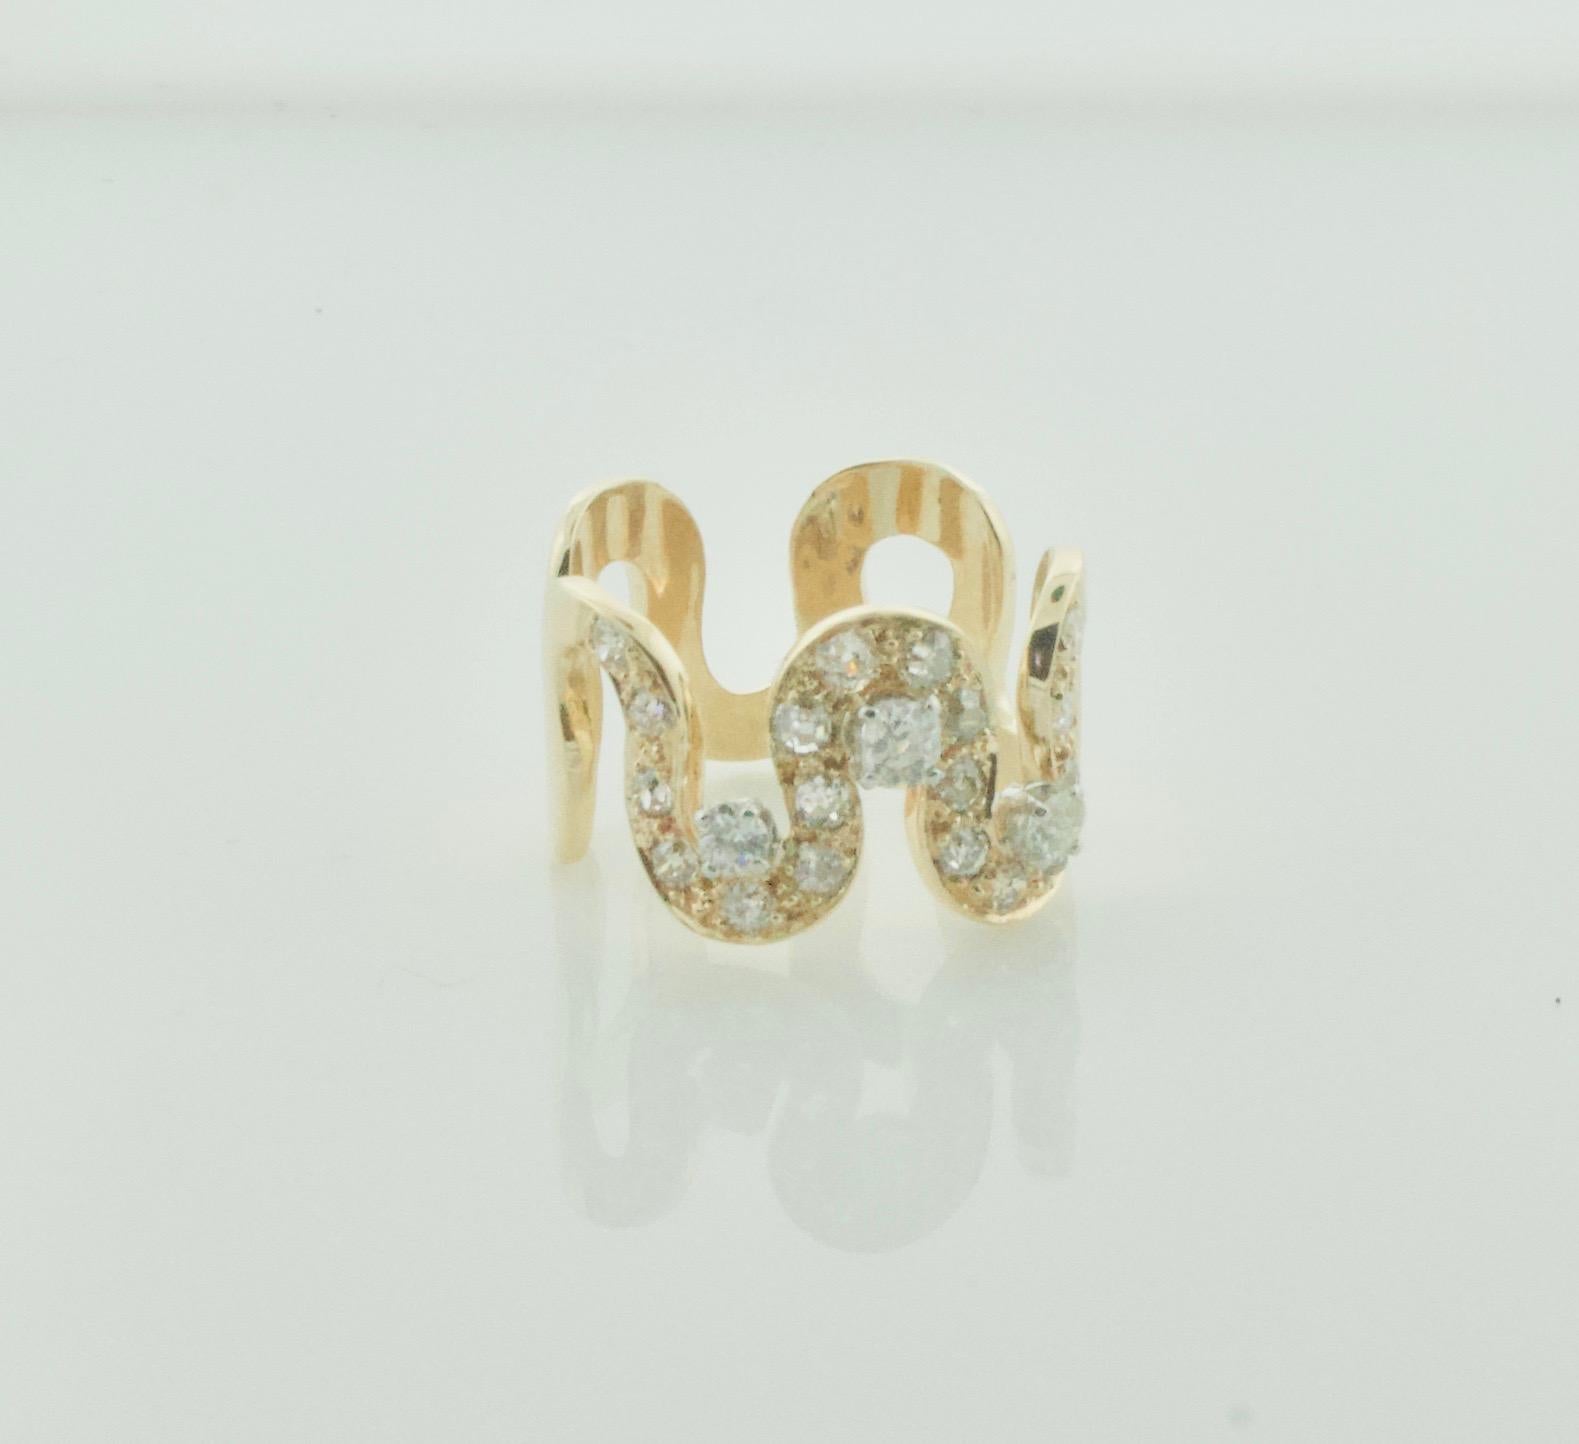 Diamond Free Form Diamond Ring Circa 1960's in Yellow Gold
Composed of 21 Old Mine and Round Cut Diamonds Weighing .75 carats.
This Ring Harkens Back To The Swingin' 1960's.  
During this Decade Many Art Deco Pieces Were Broken up to Make New